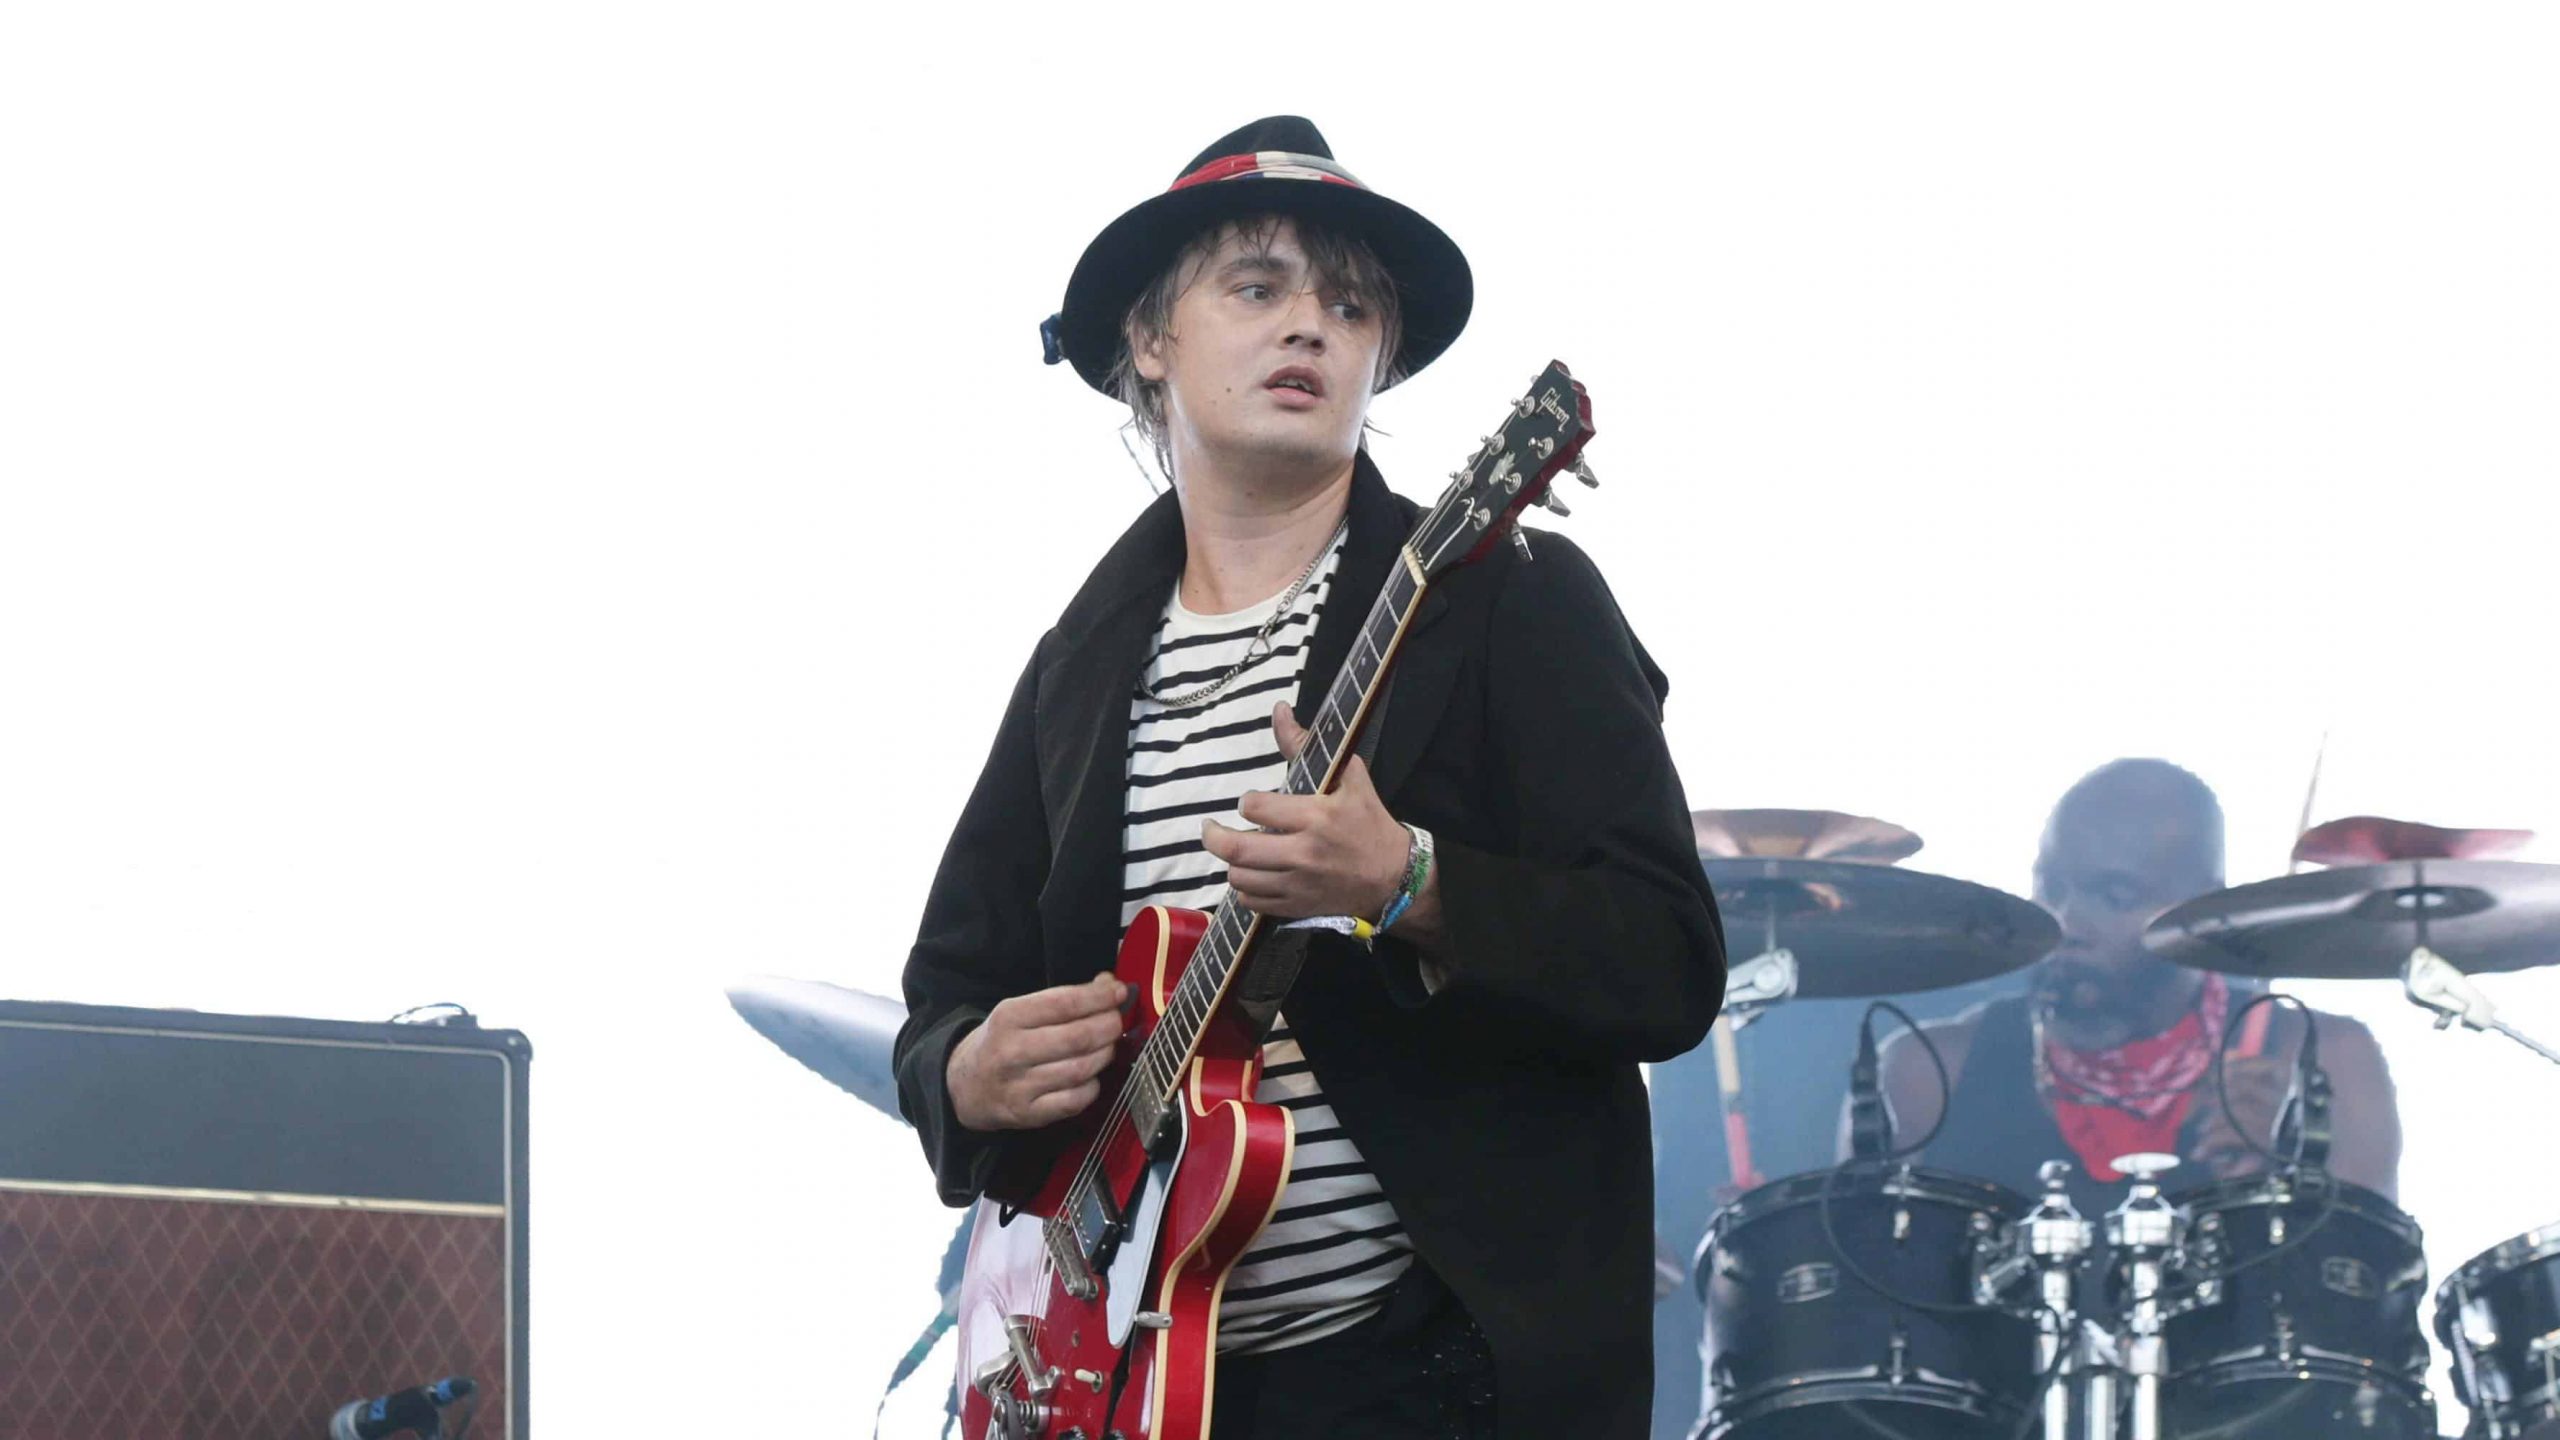 ‘Nationalise everything’: Pete Doherty on how he’d fix Britain